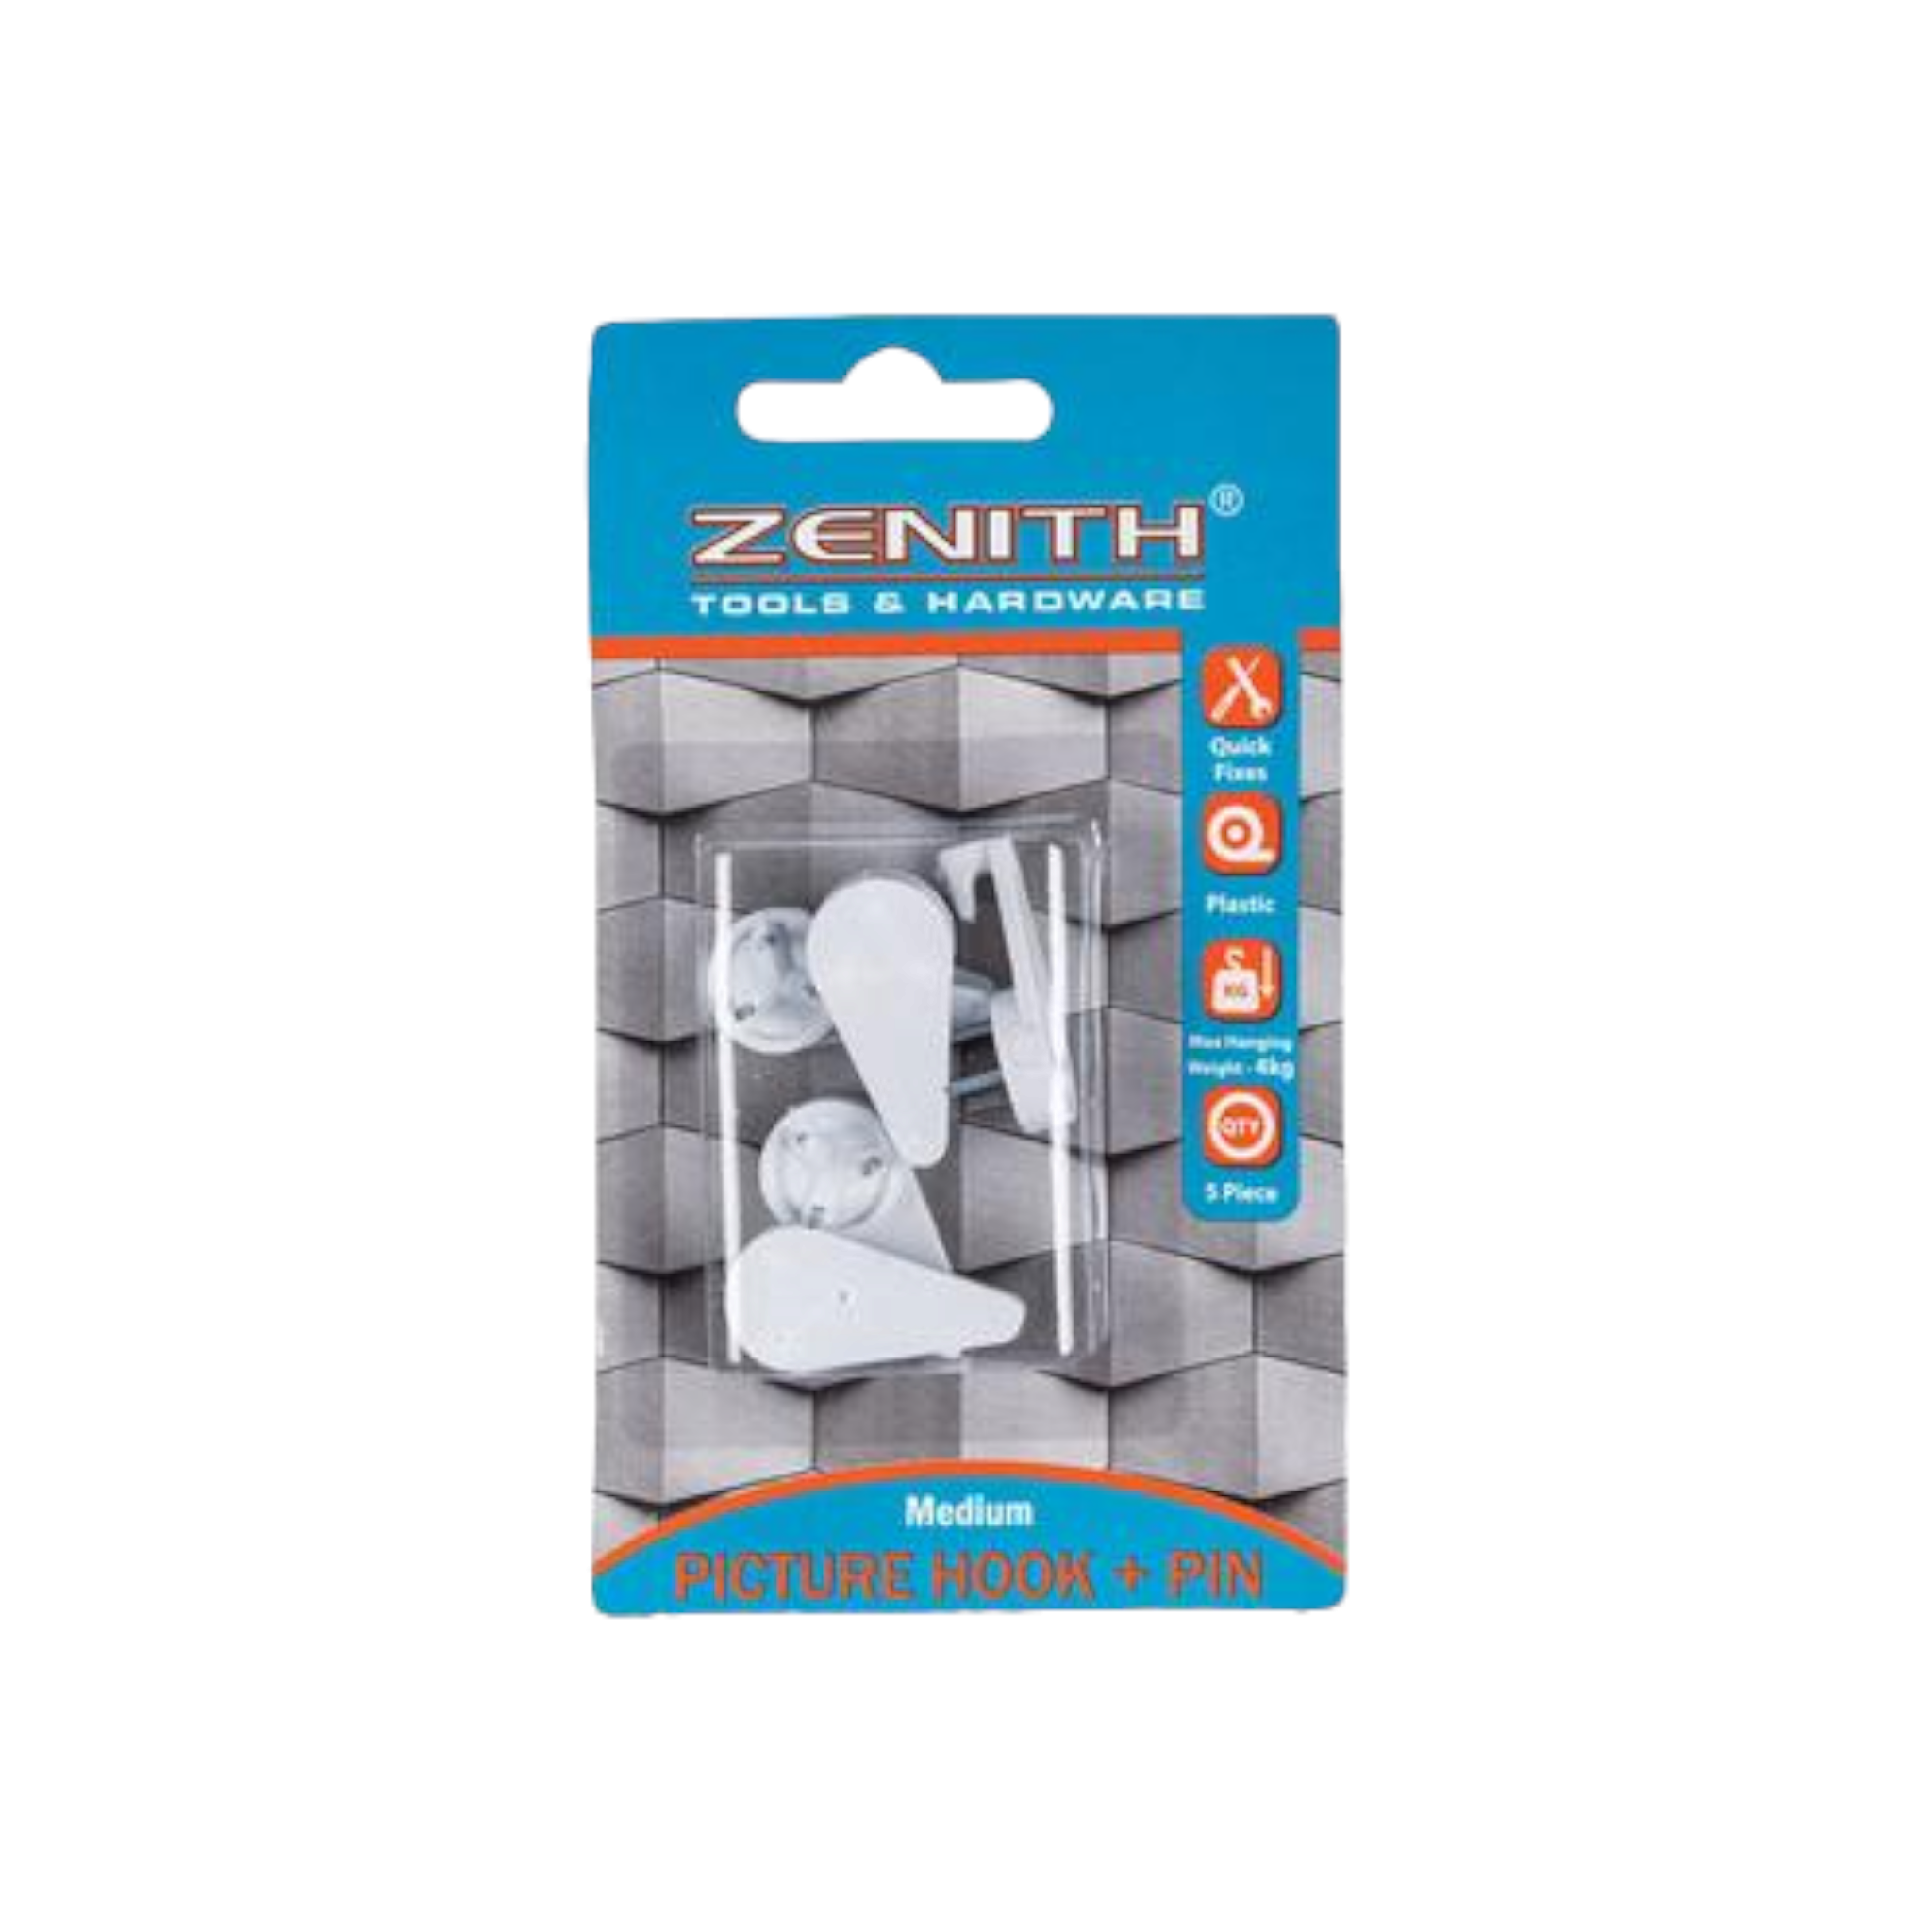 Zenith Picture Hook with Pin White Medium 4kg 5pack